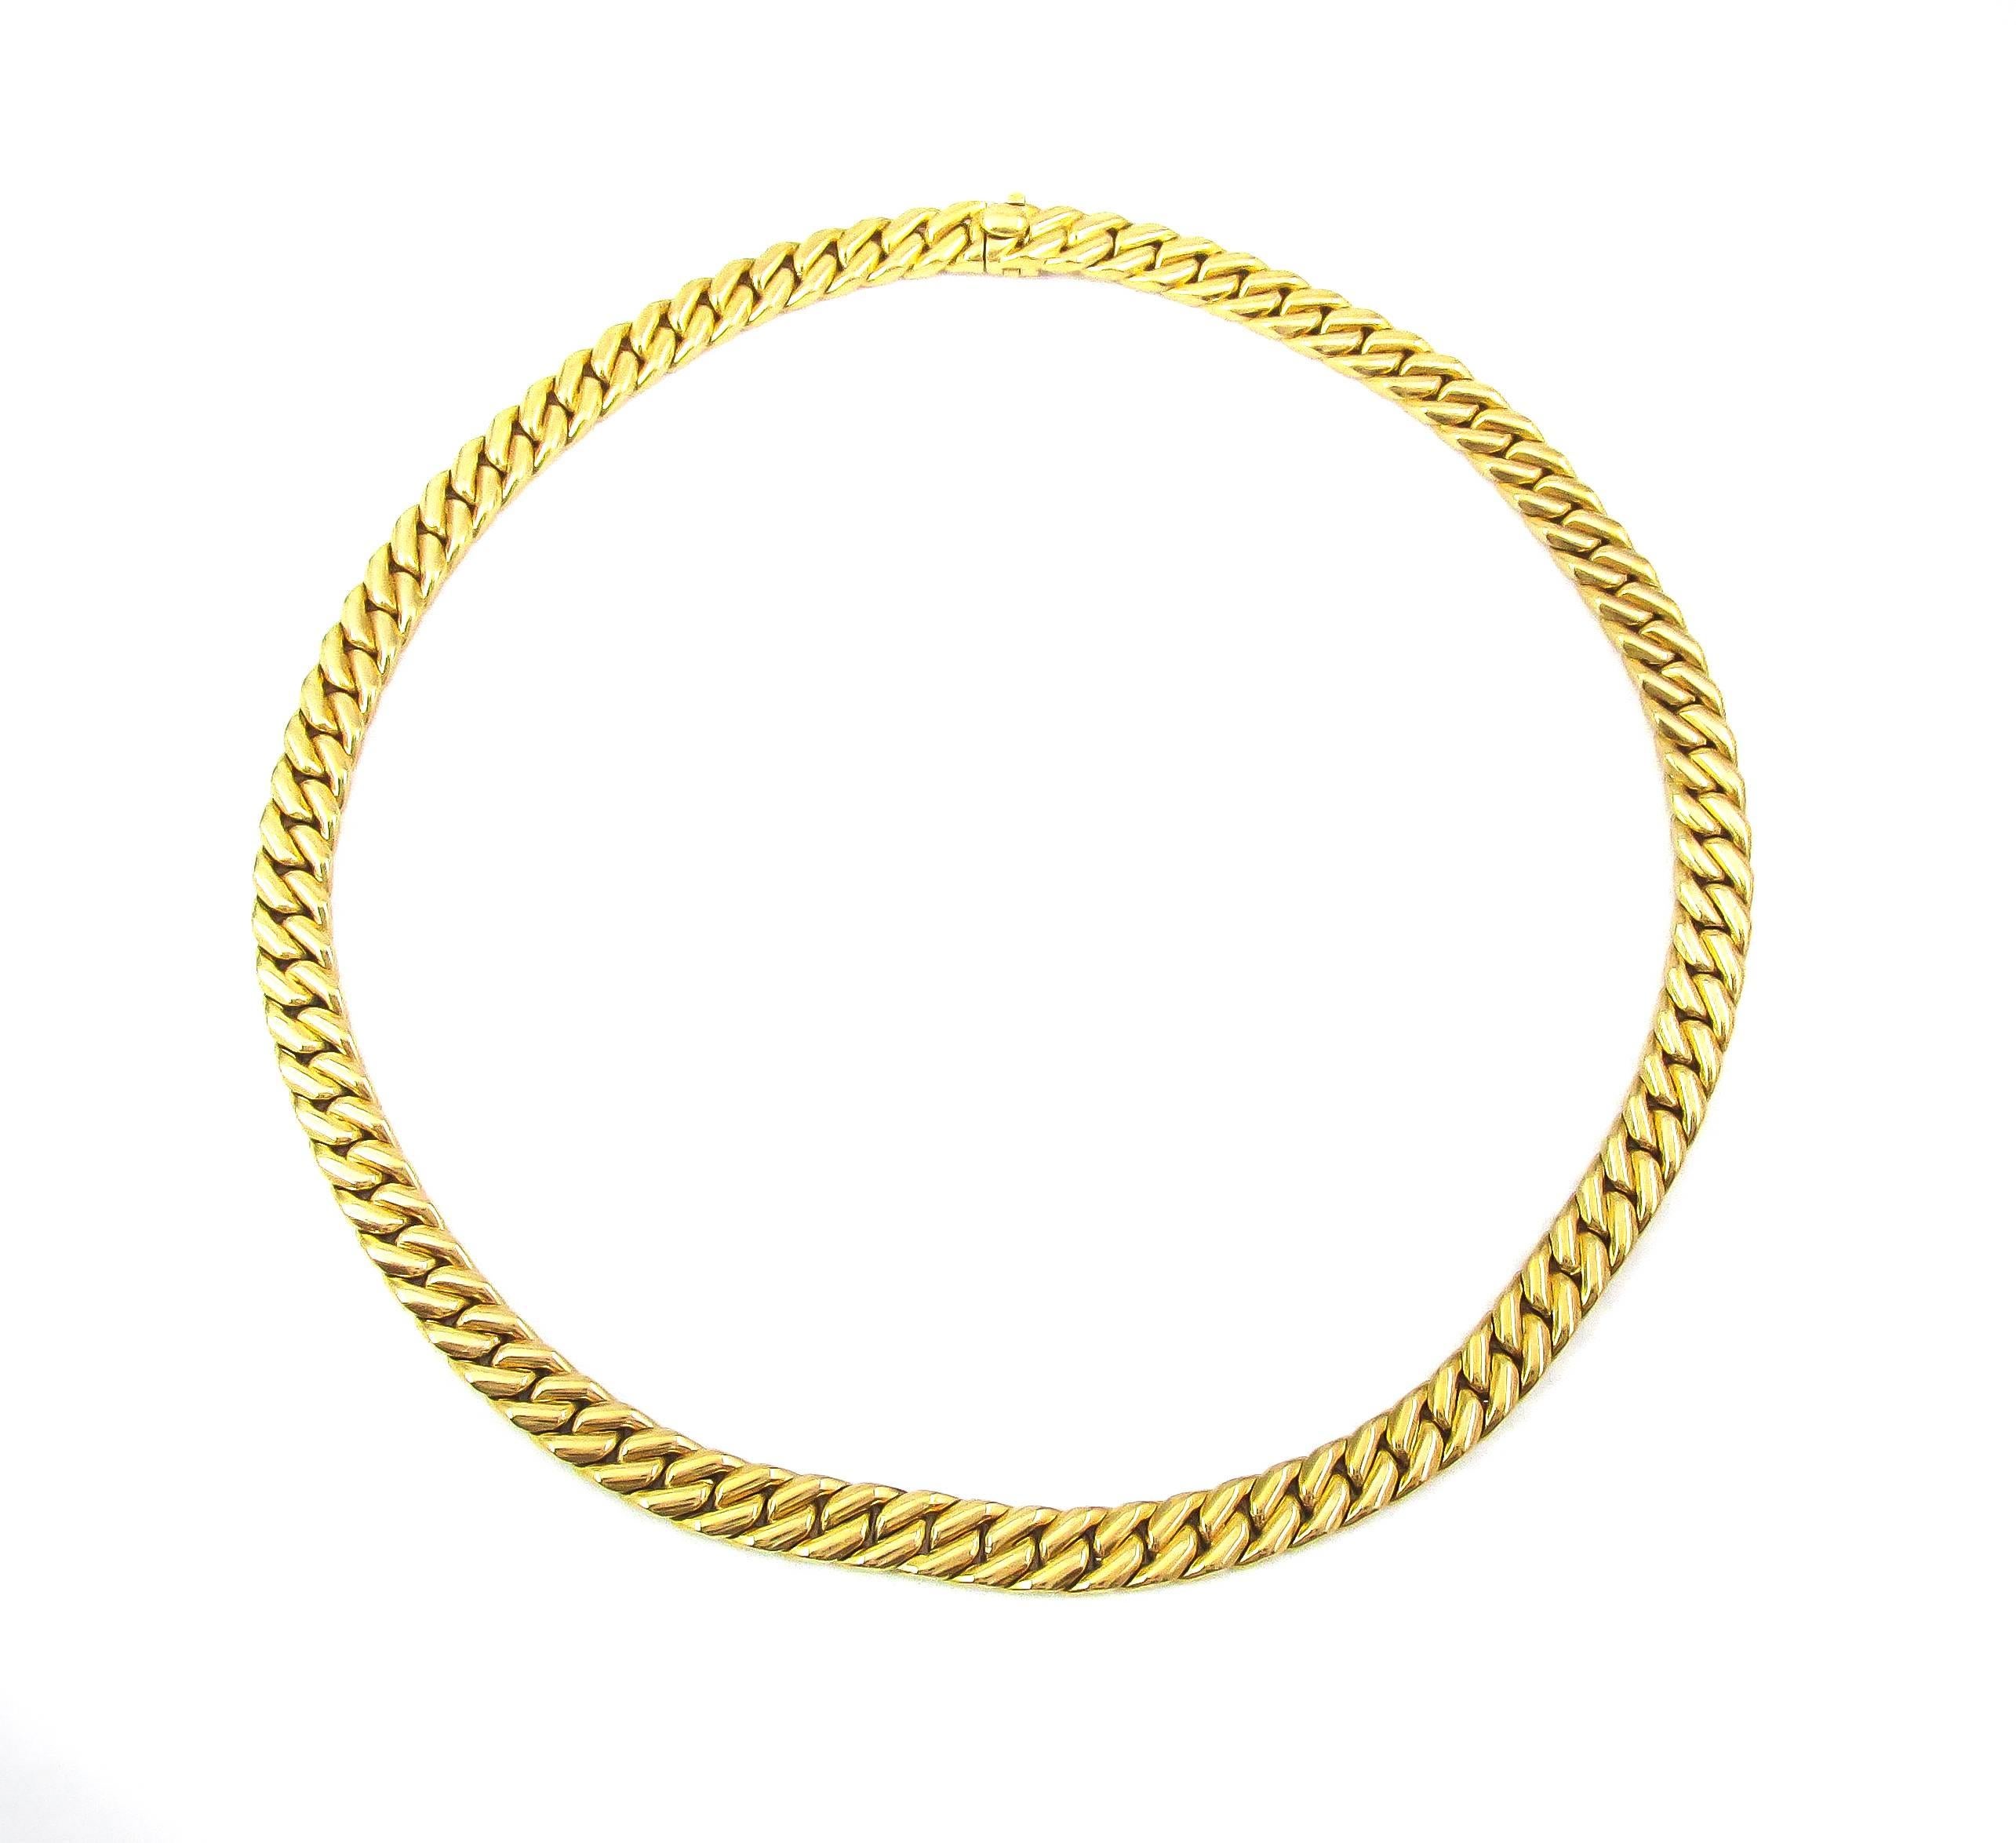 18 karat yellow gold braided chain link necklace by Mauboussin Paris, ca 1980. An elegant piece of jewelry and wearable for any occasion.

- 15.5” long x 0.25”
- Stamped Mauboussin Paris
- Numbered 17052
- Hallmarks and markers mark
- 78.6